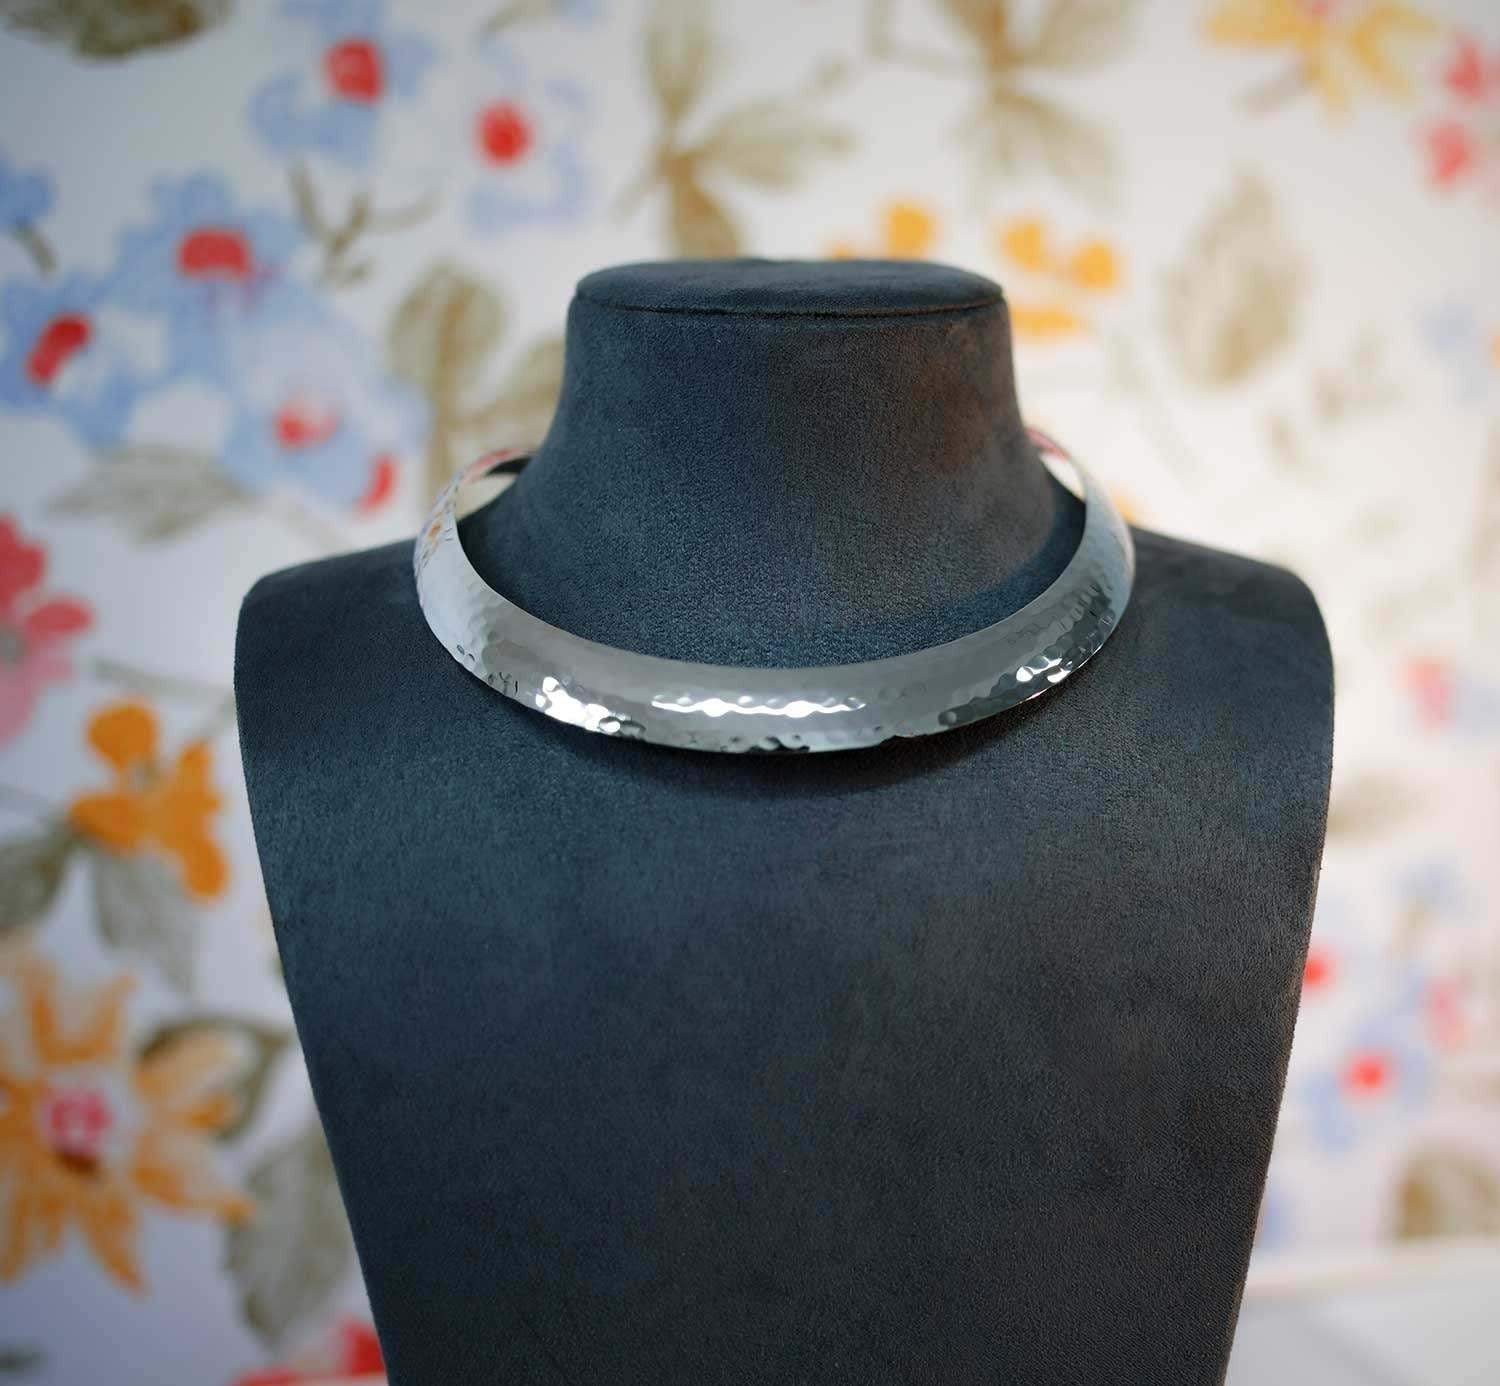 The Restored Vintage Collection: Large Bean Collar Necklace | Anthropologie